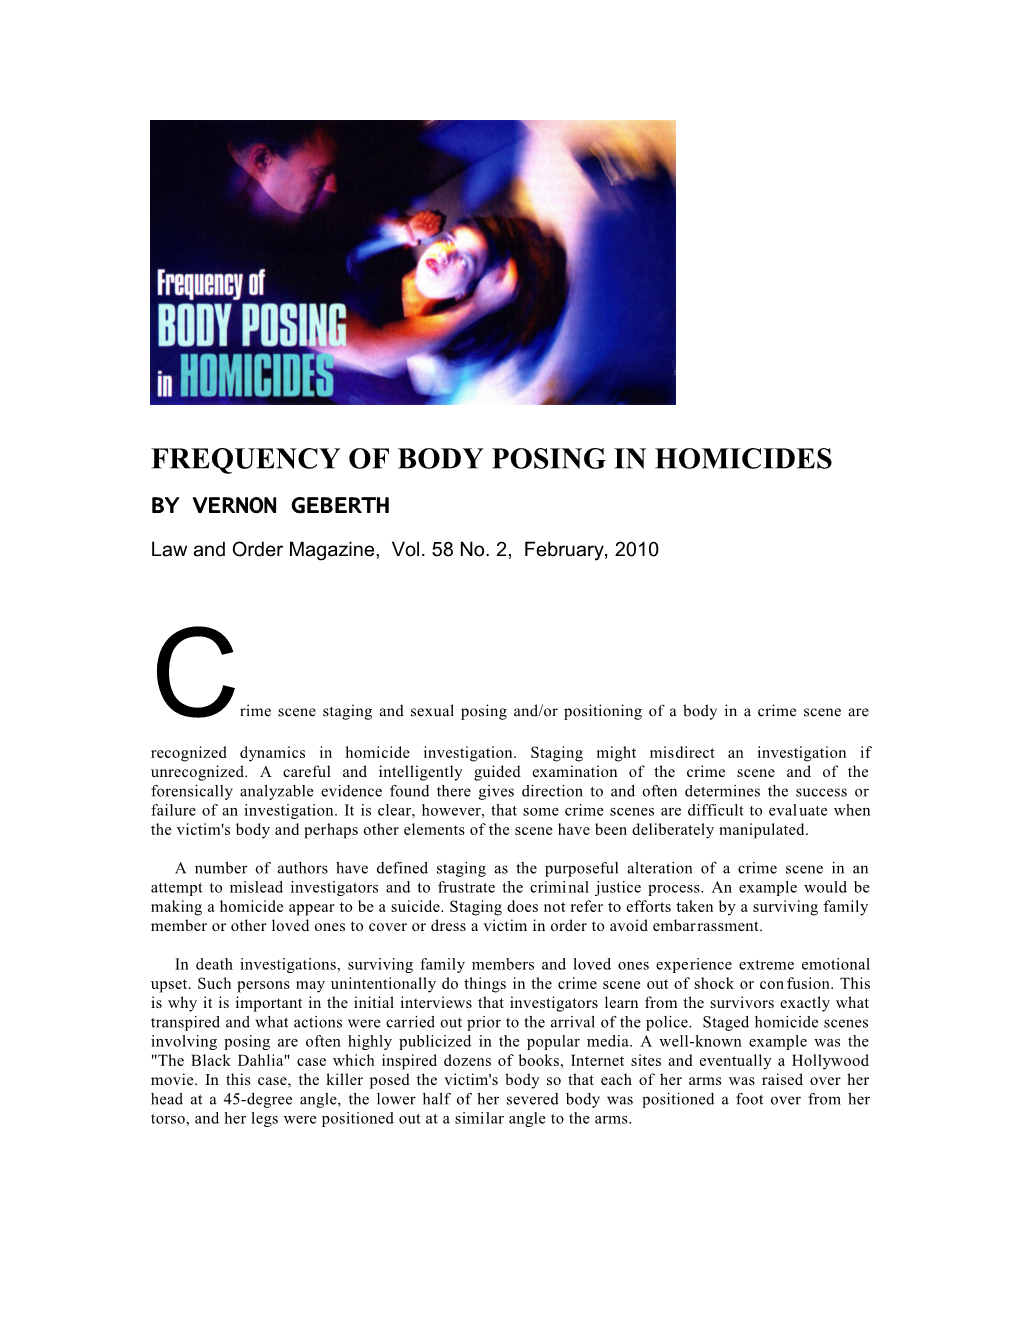 Frequency of Body Posing in Homicides